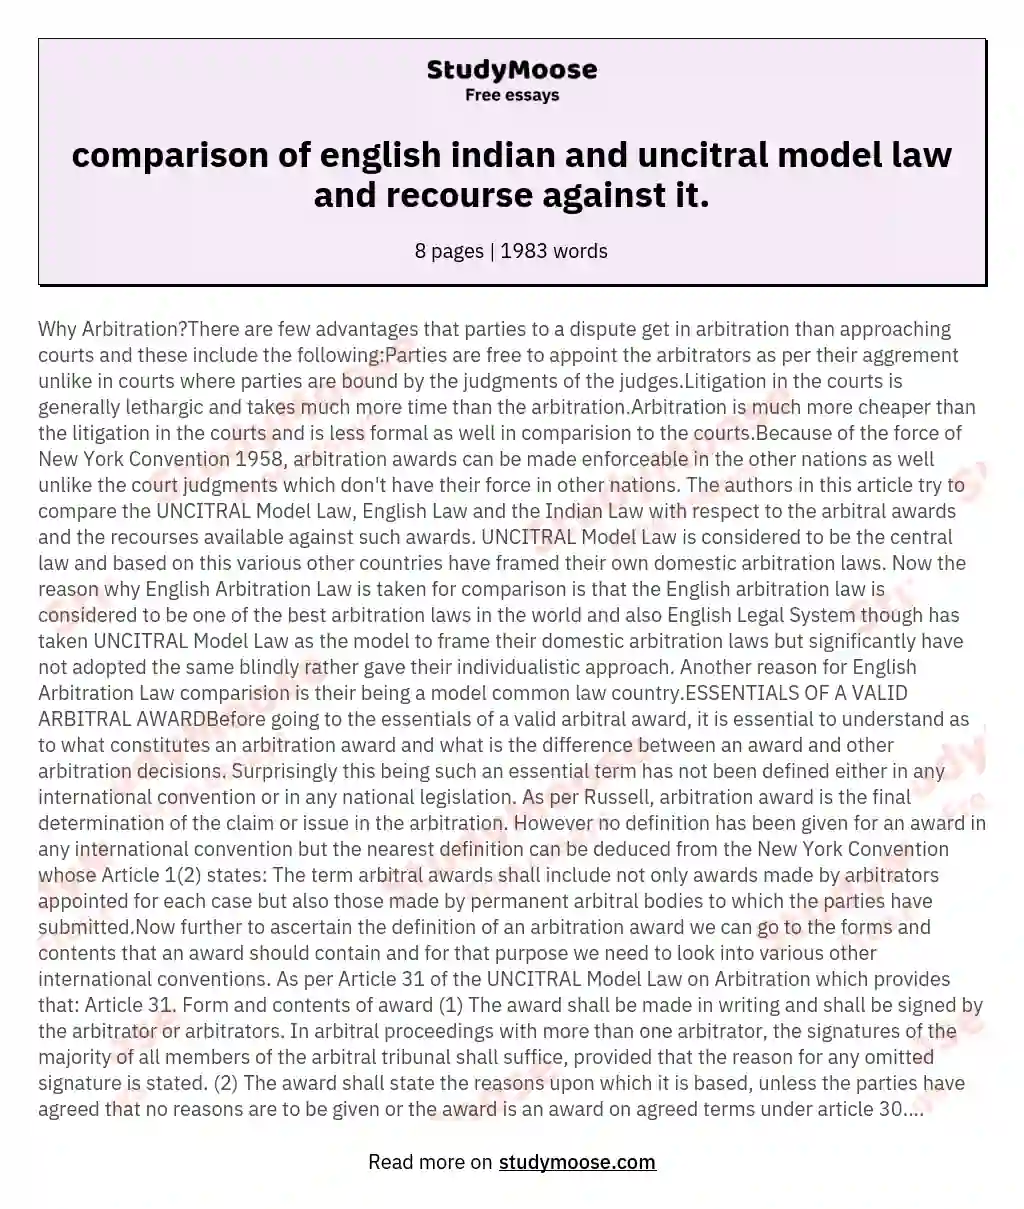 comparison of english indian and uncitral model law and recourse against it. essay